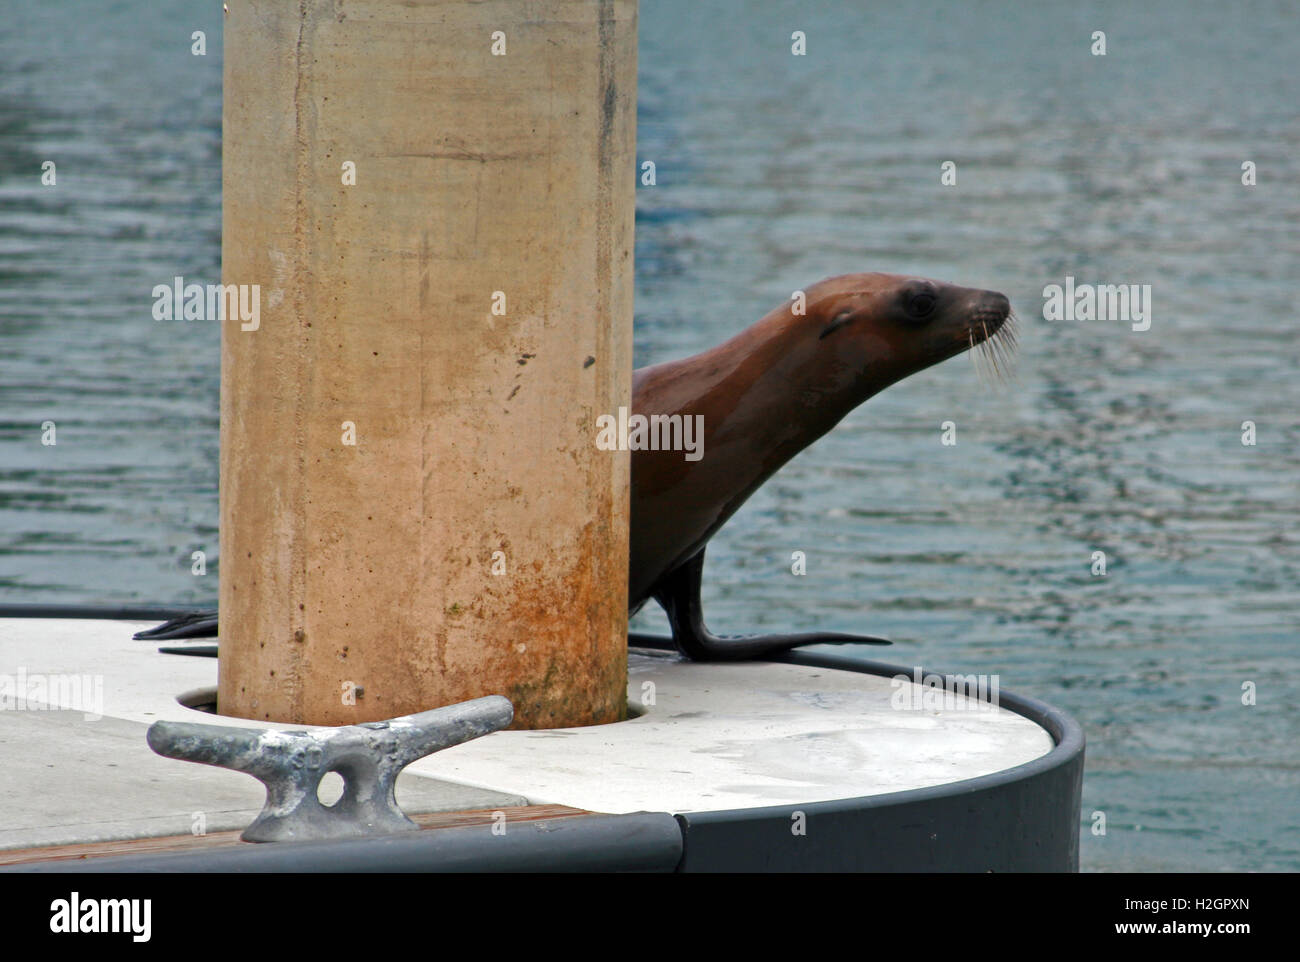 Sea Lion on resting on boat dock slip in Alamitos harbor of Long Beach / Seal Beach in southern California USA Stock Photo